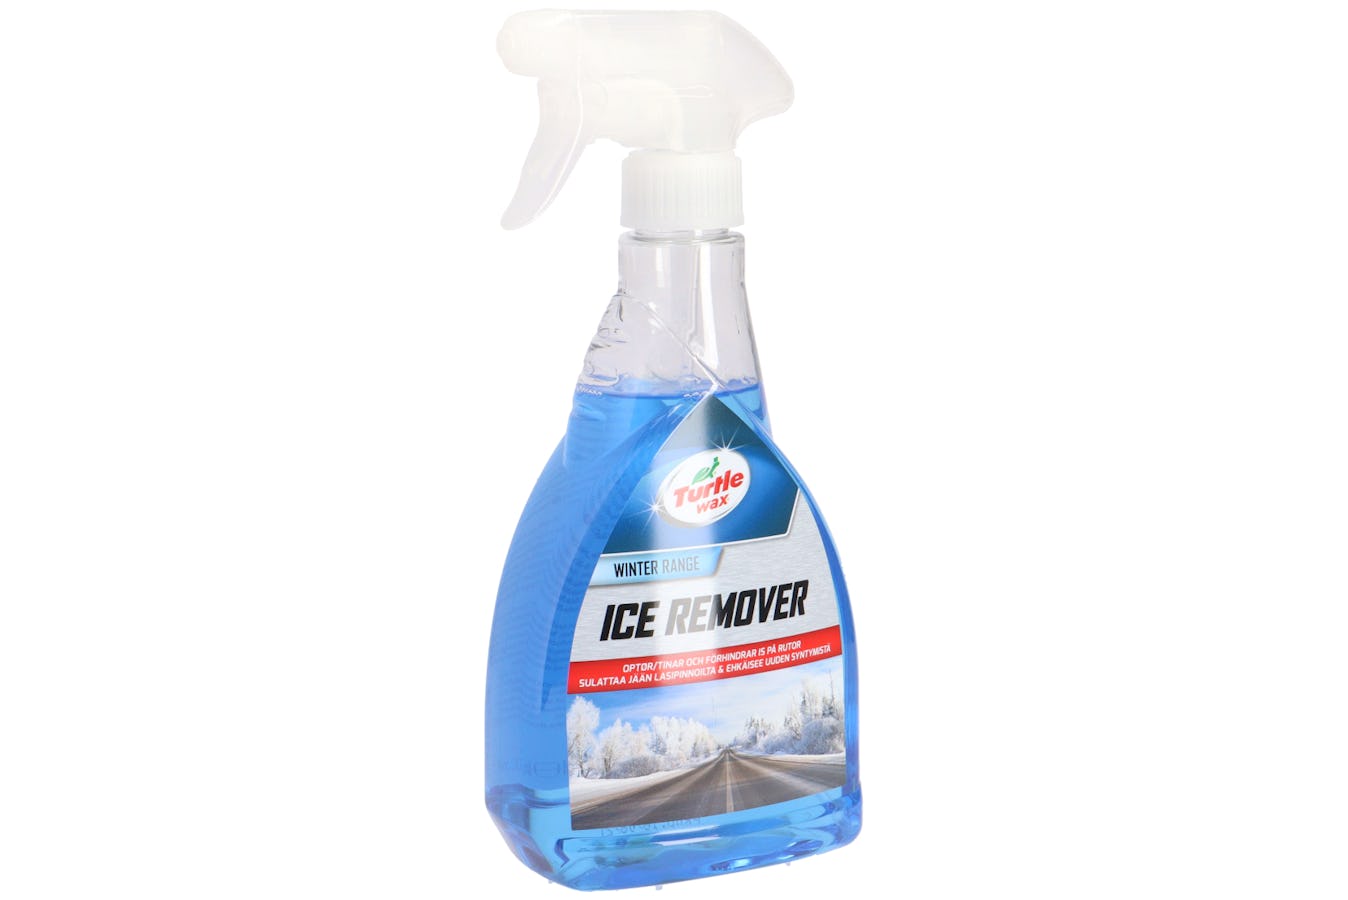 Ice remover